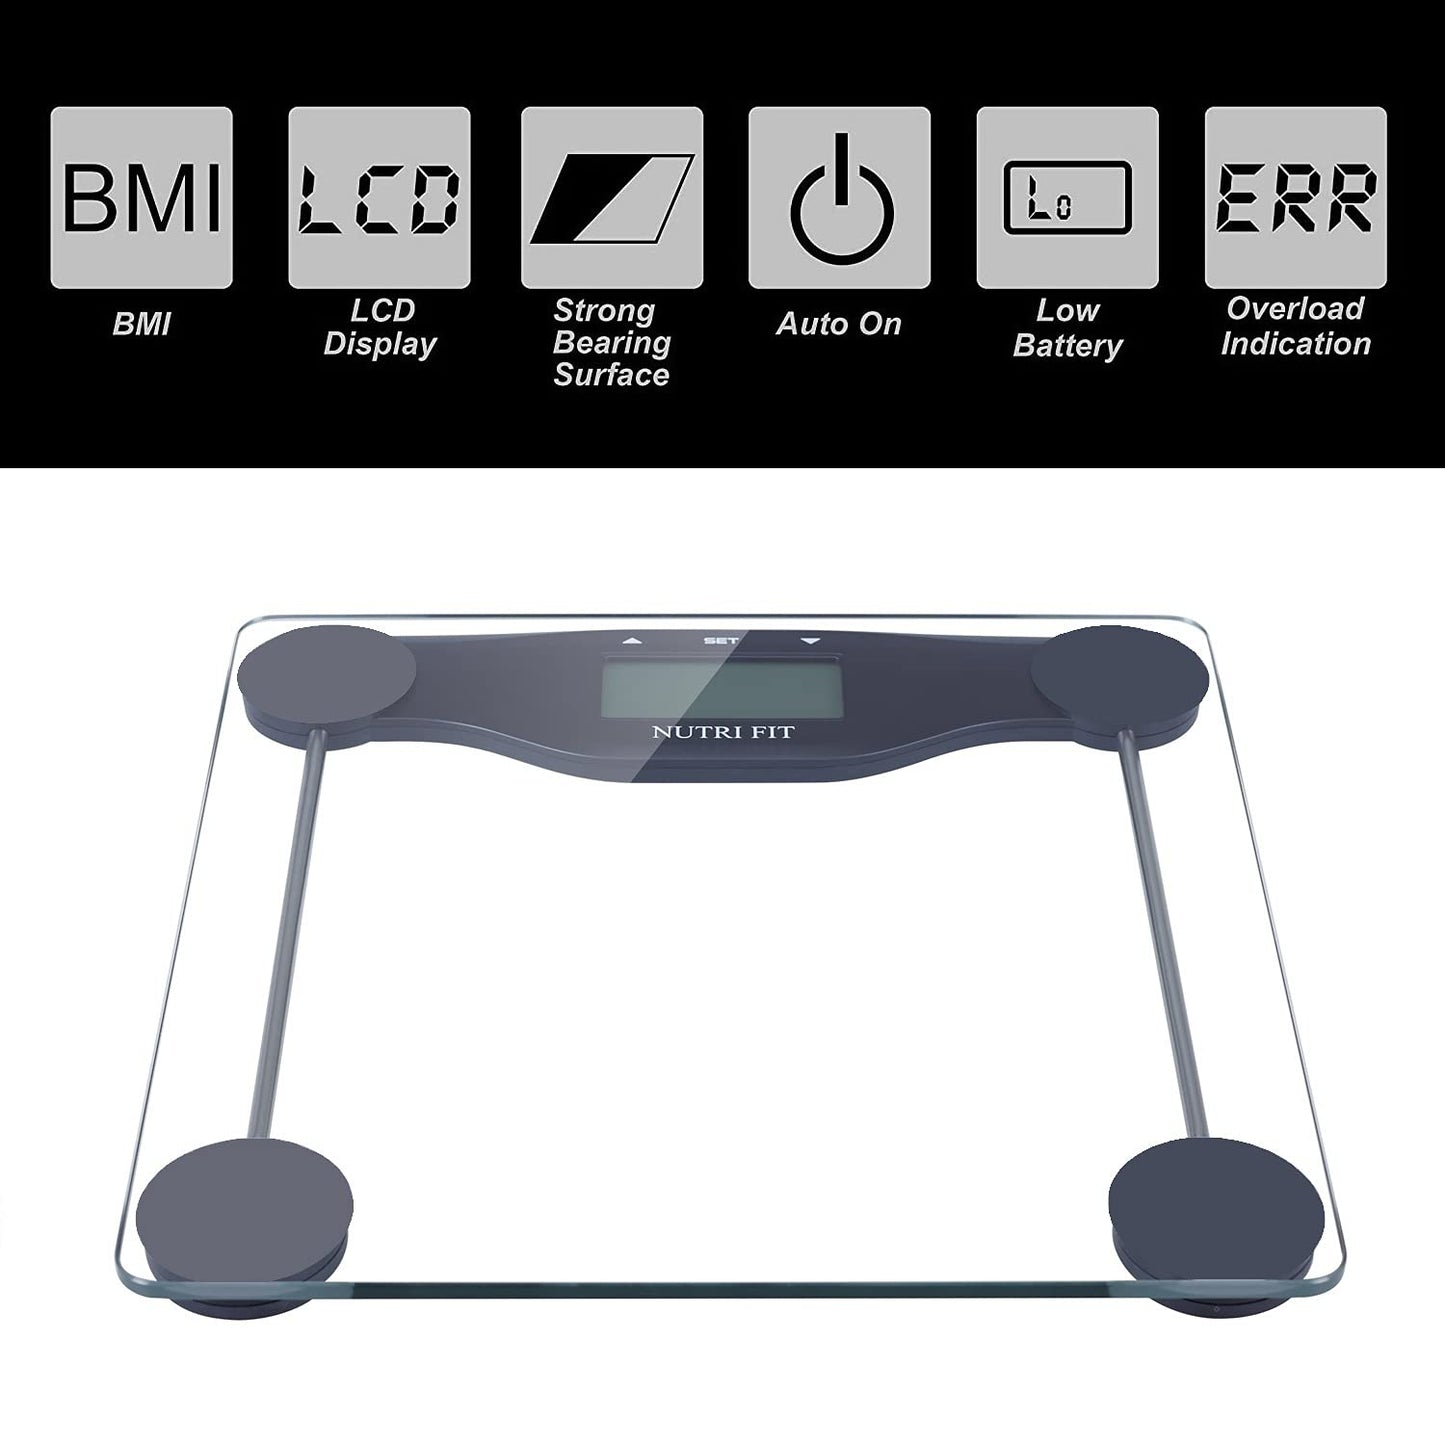 Professional title: "Digital BMI Scale with Body Mass Index Analysis, 400 Lbs Capacity, Large Backlight Display - Black"